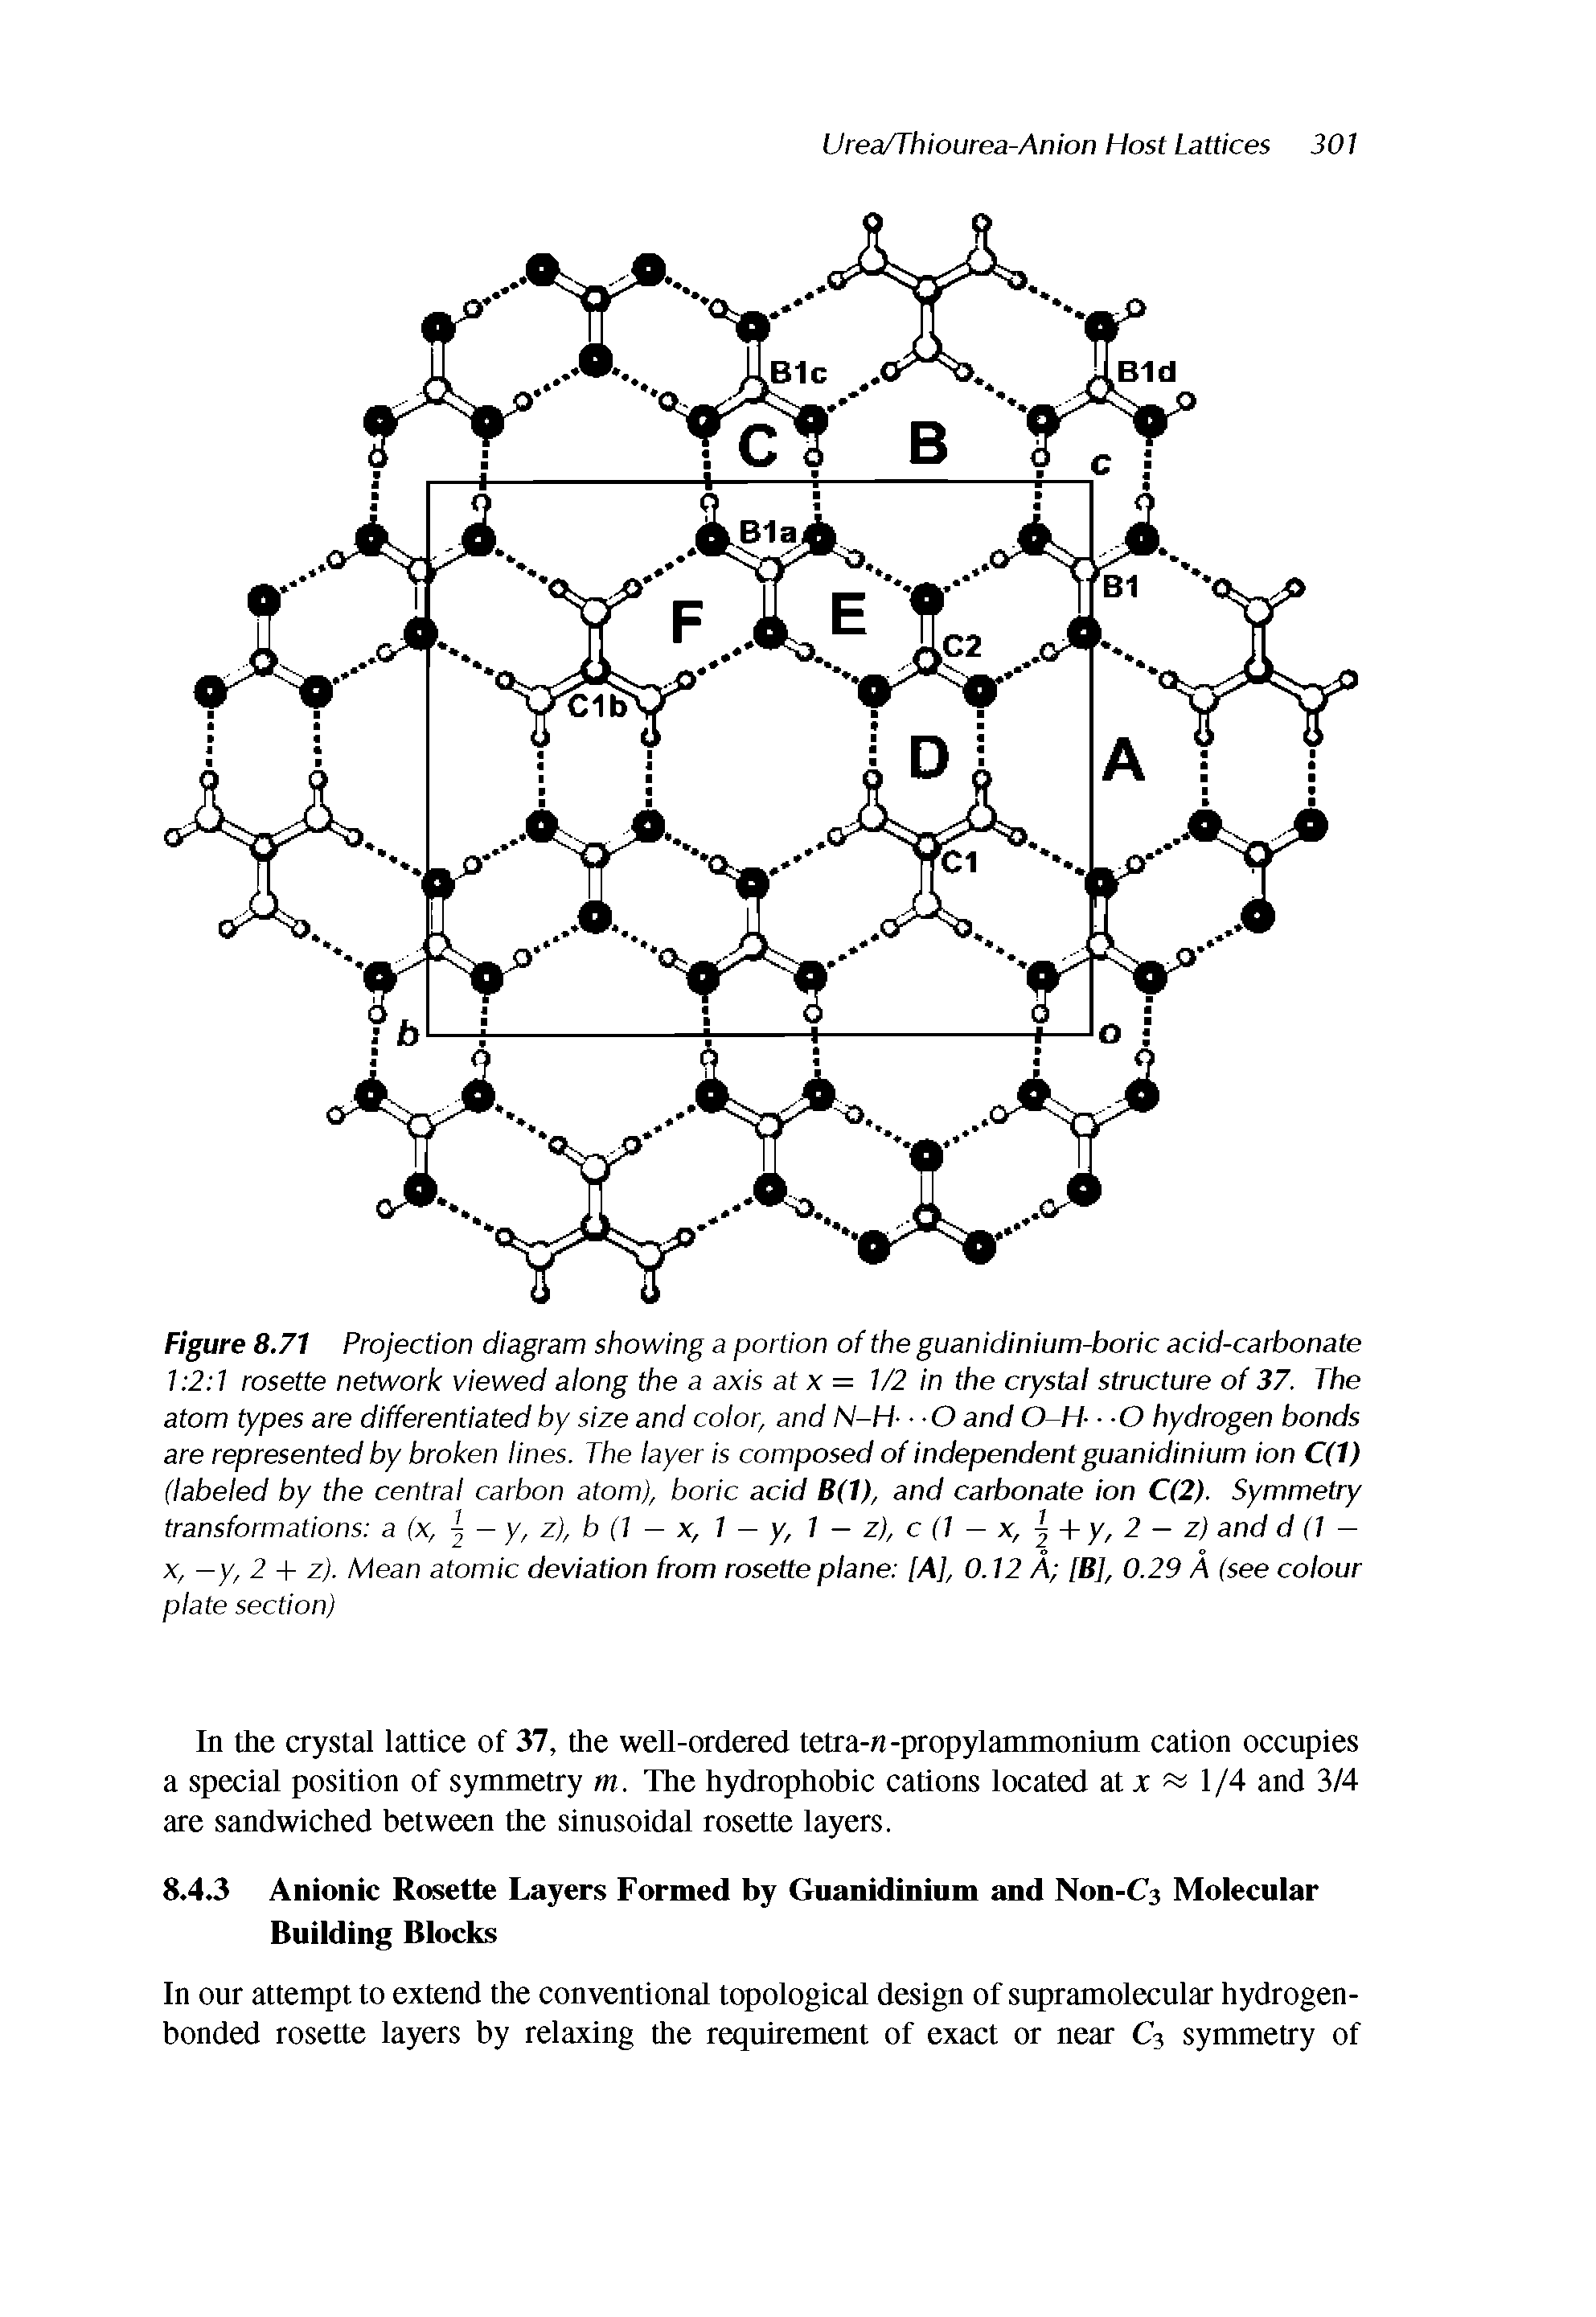 Figure 8,71 Projection diagram showing a portion of the guanidinium-boric acid-carbonate 1 2 1 rosette network viewed along the a axis at x = 1/2 in the crystal structure of 37. The atom types are differentiated by size and color, and N-H- O and O-H O hydrogen bonds are represented by broken lines. The layer is composed of independent guanidinium ion C(1) (labeled by the central carbon atom), boric acid B(1), and carbonate ion C(2). Symmetry transformations a (x, — y, z), b (1 — x, 1 — y, 1 — z), c (1 — x, j y, 2 — z) and d (1 X, —y, 2 + z). Mean atomic deviation from rosette plane [A], 0.12 A [B], 0.29 A (see colour plate section)...